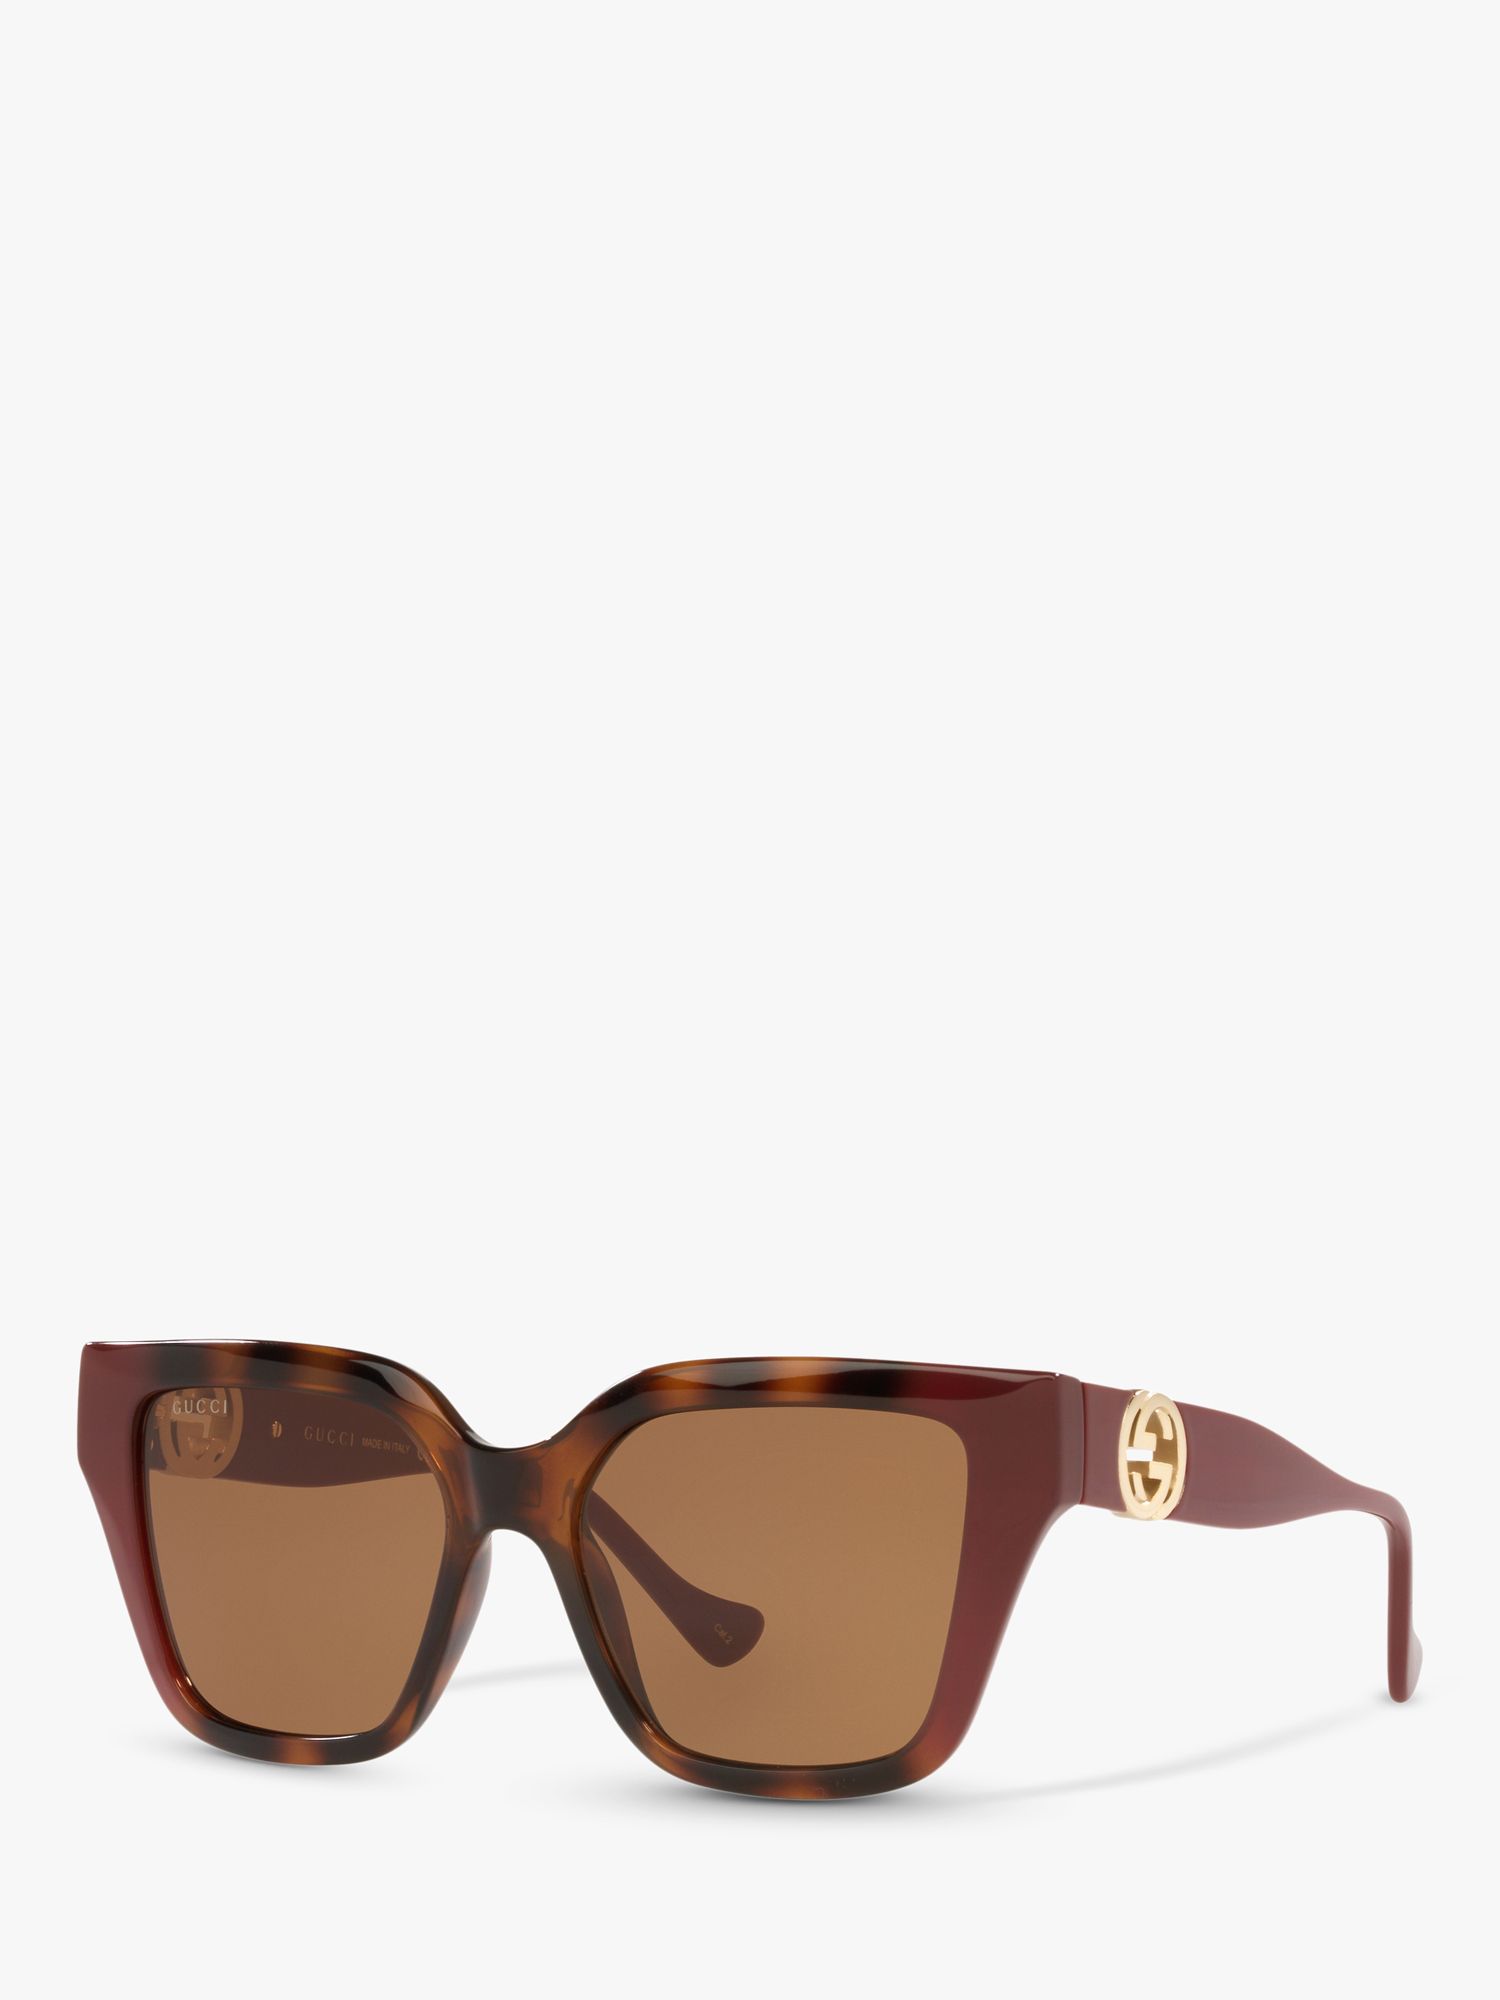 Gucci GG1023S Women's D-Frame Sunglasses, Brown Red/Brown at John Lewis ...